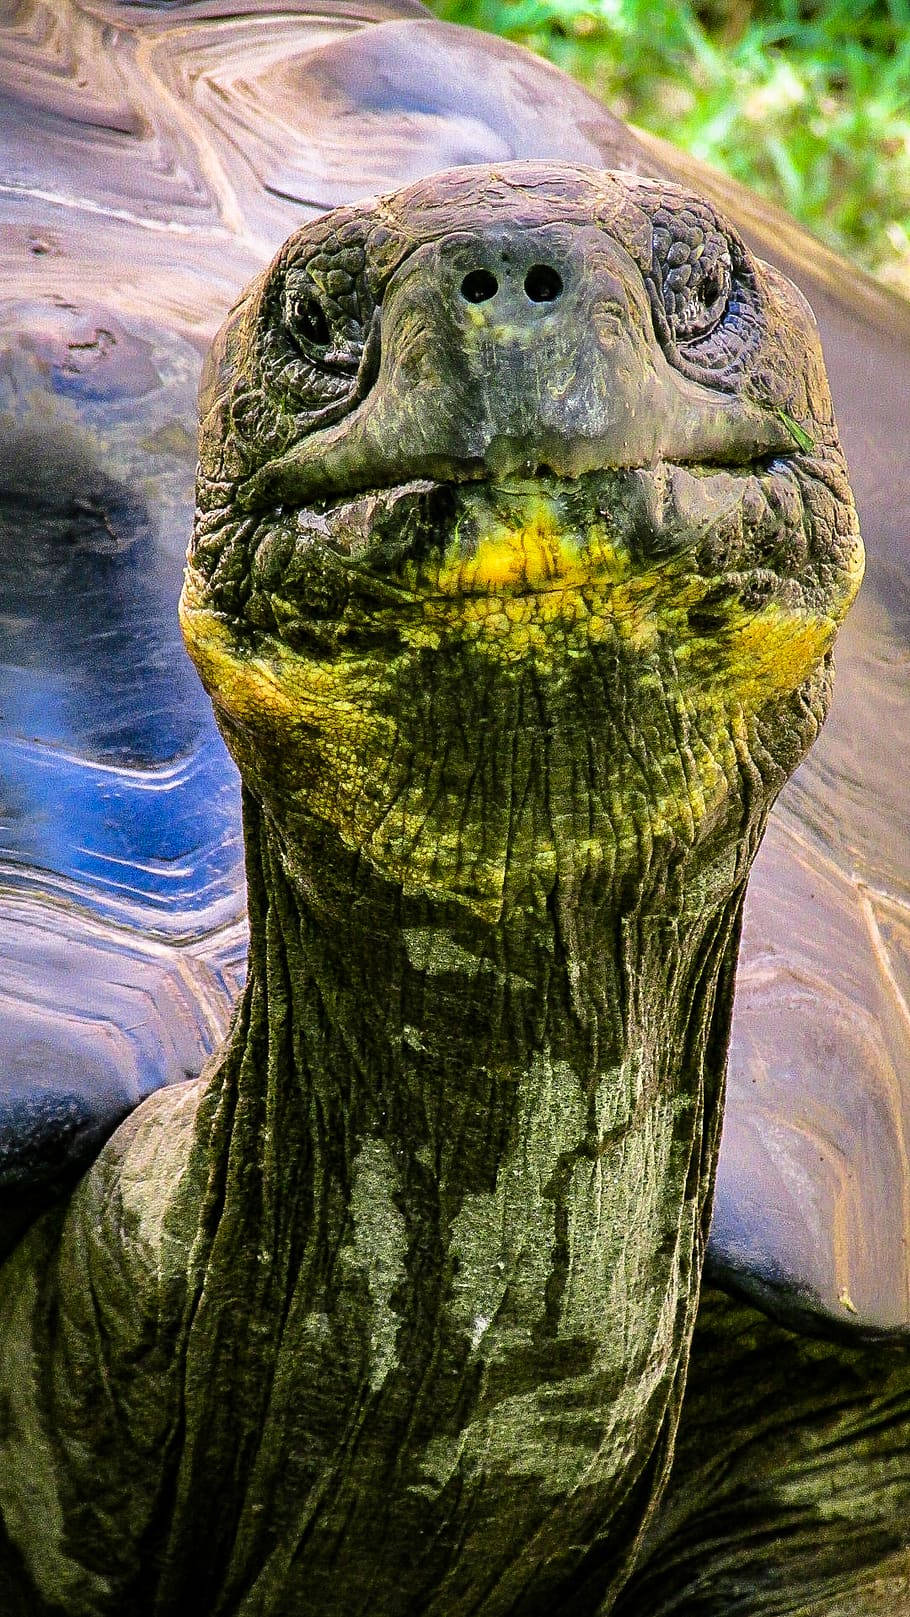 Caption: Close-up Shot of a Wrinkly Tortoise Wallpaper